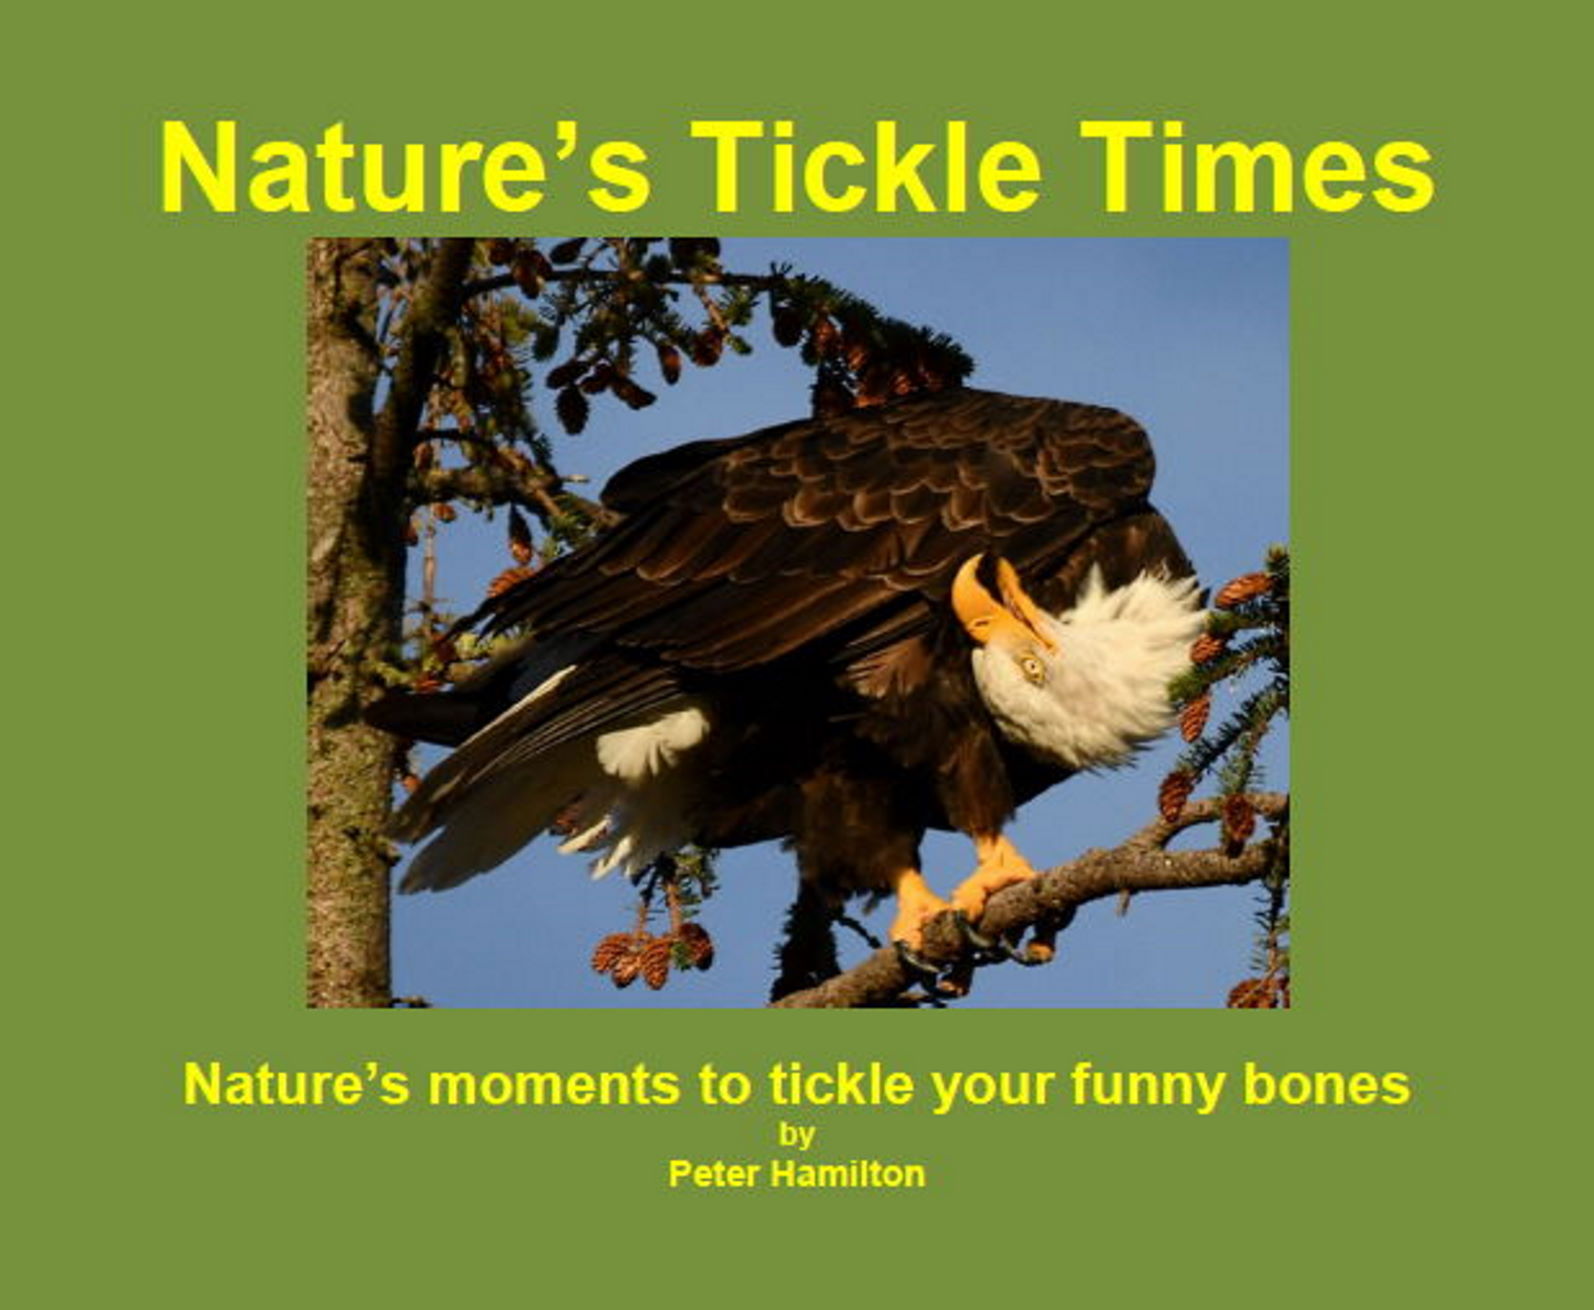 Wildlife Humor For Peaceful Moments!